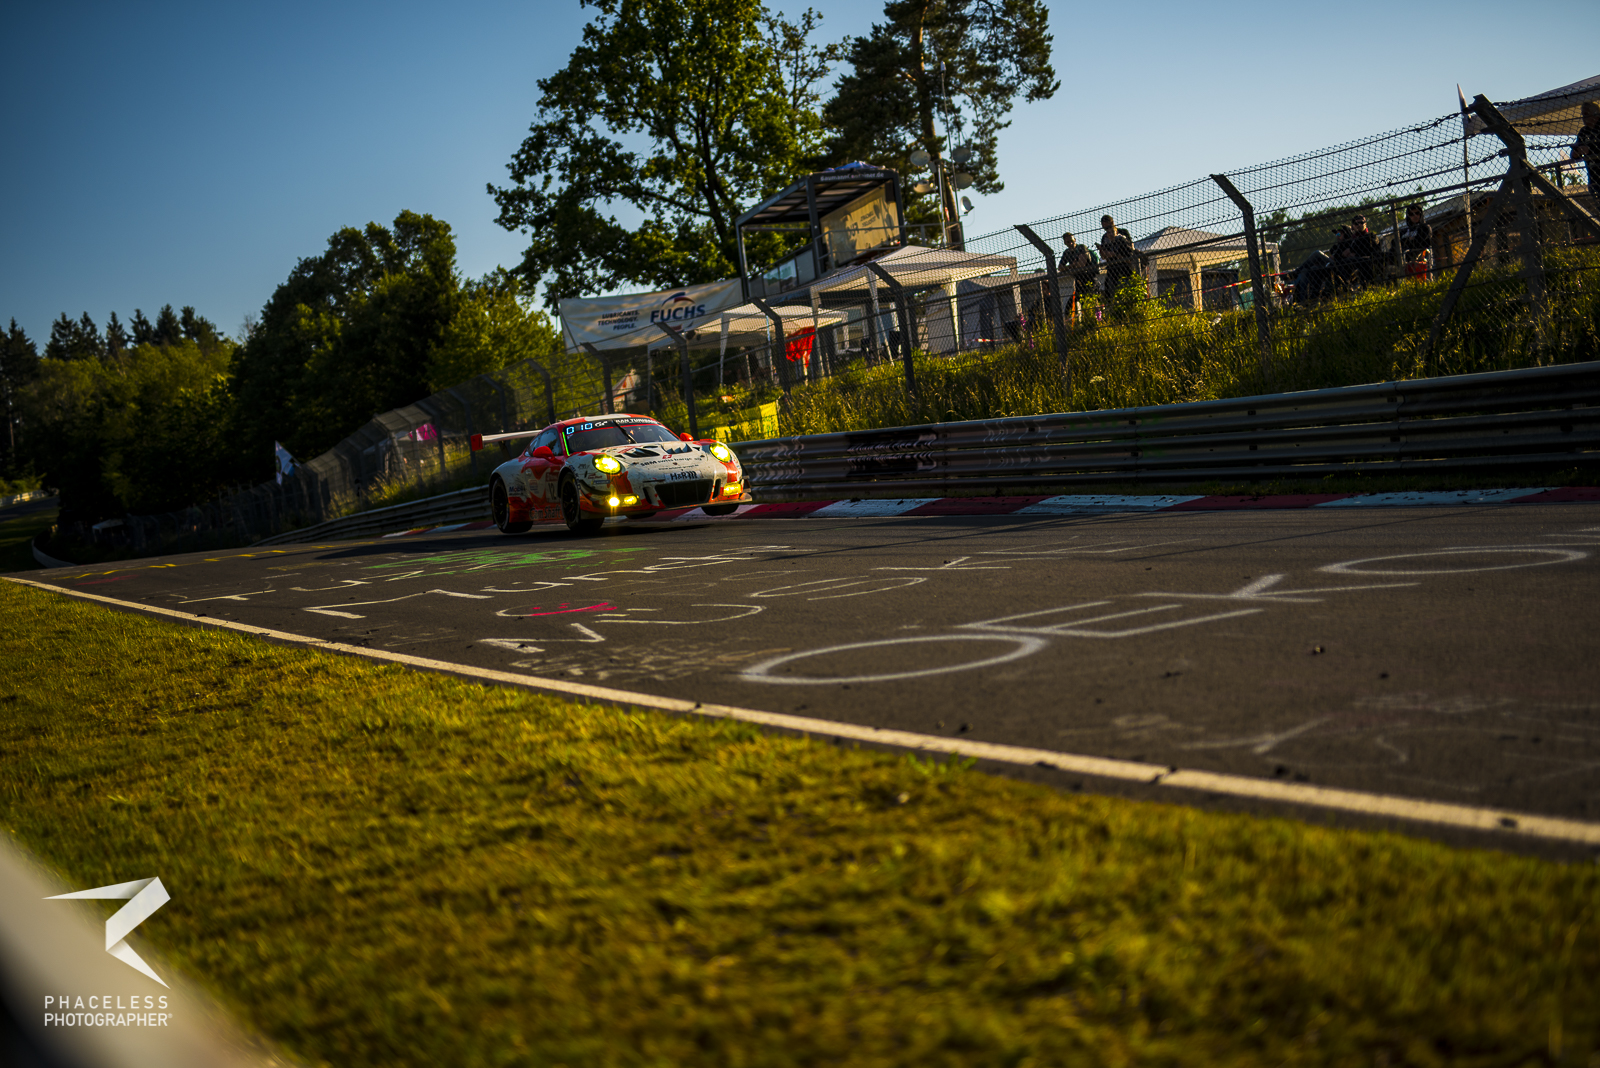 24 Hrs Nürburgring 2019 - Photo by Phaceless Photographer